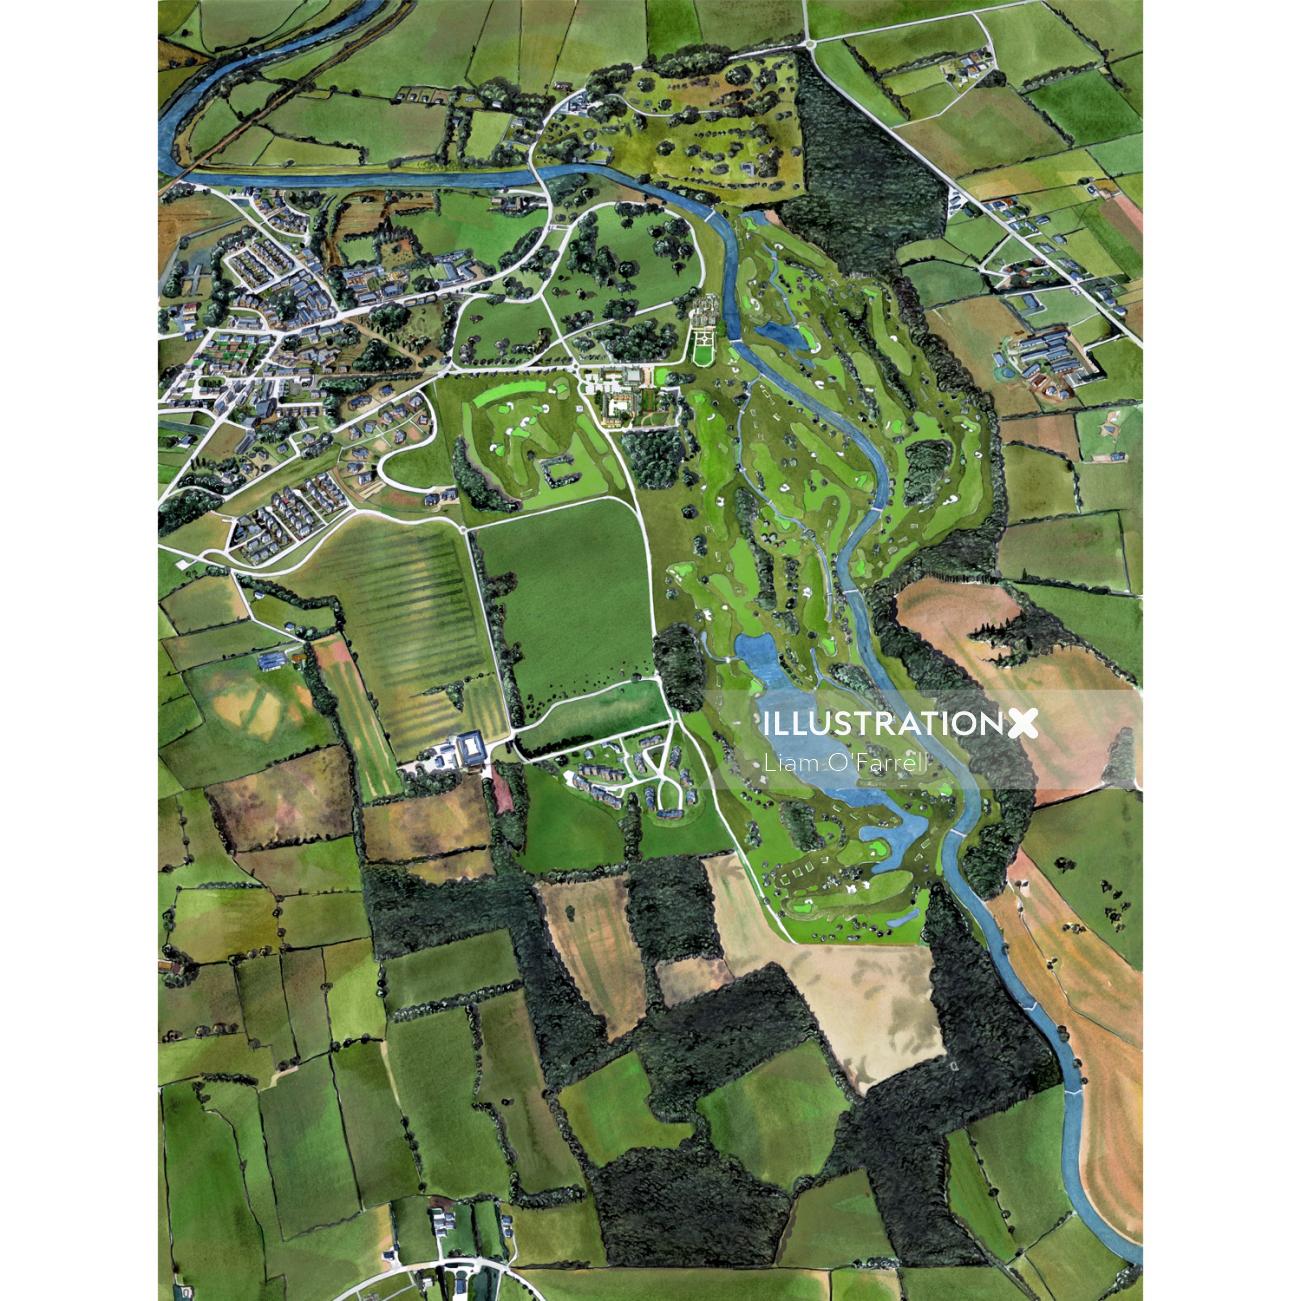 Painting of an aerial view of the countryside in Ireland and golf course